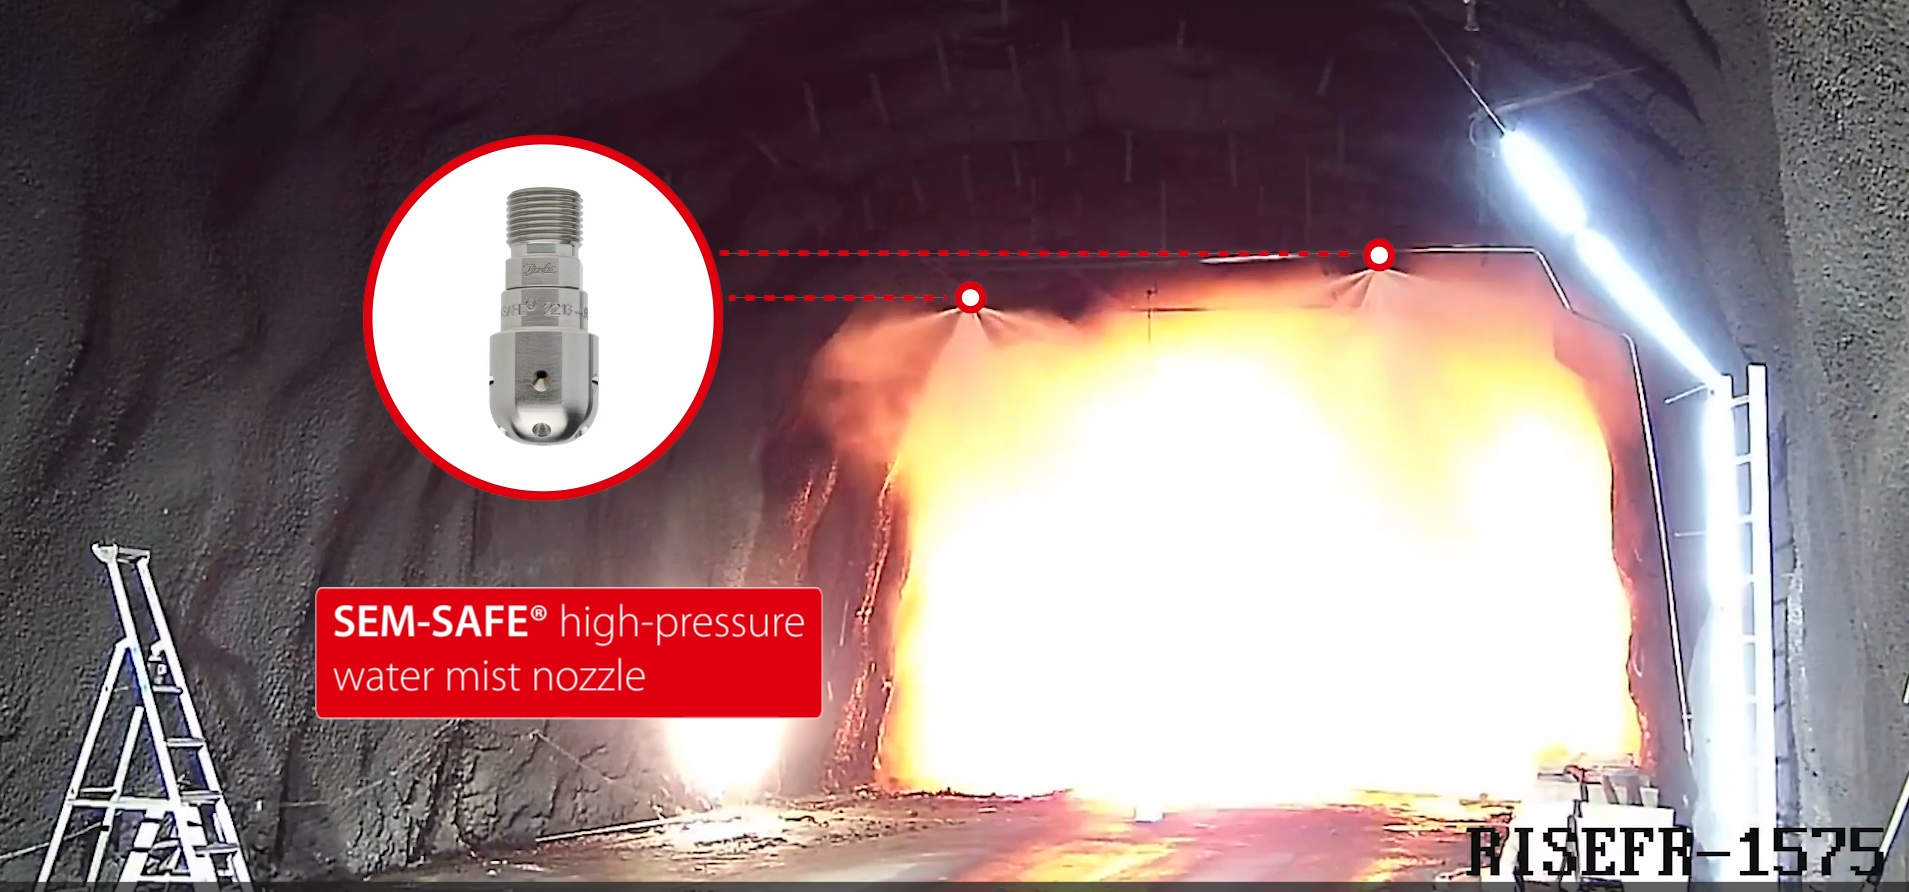 Tunnel fire test with SEM SAFE high-pressure water mist system_50MW Class B